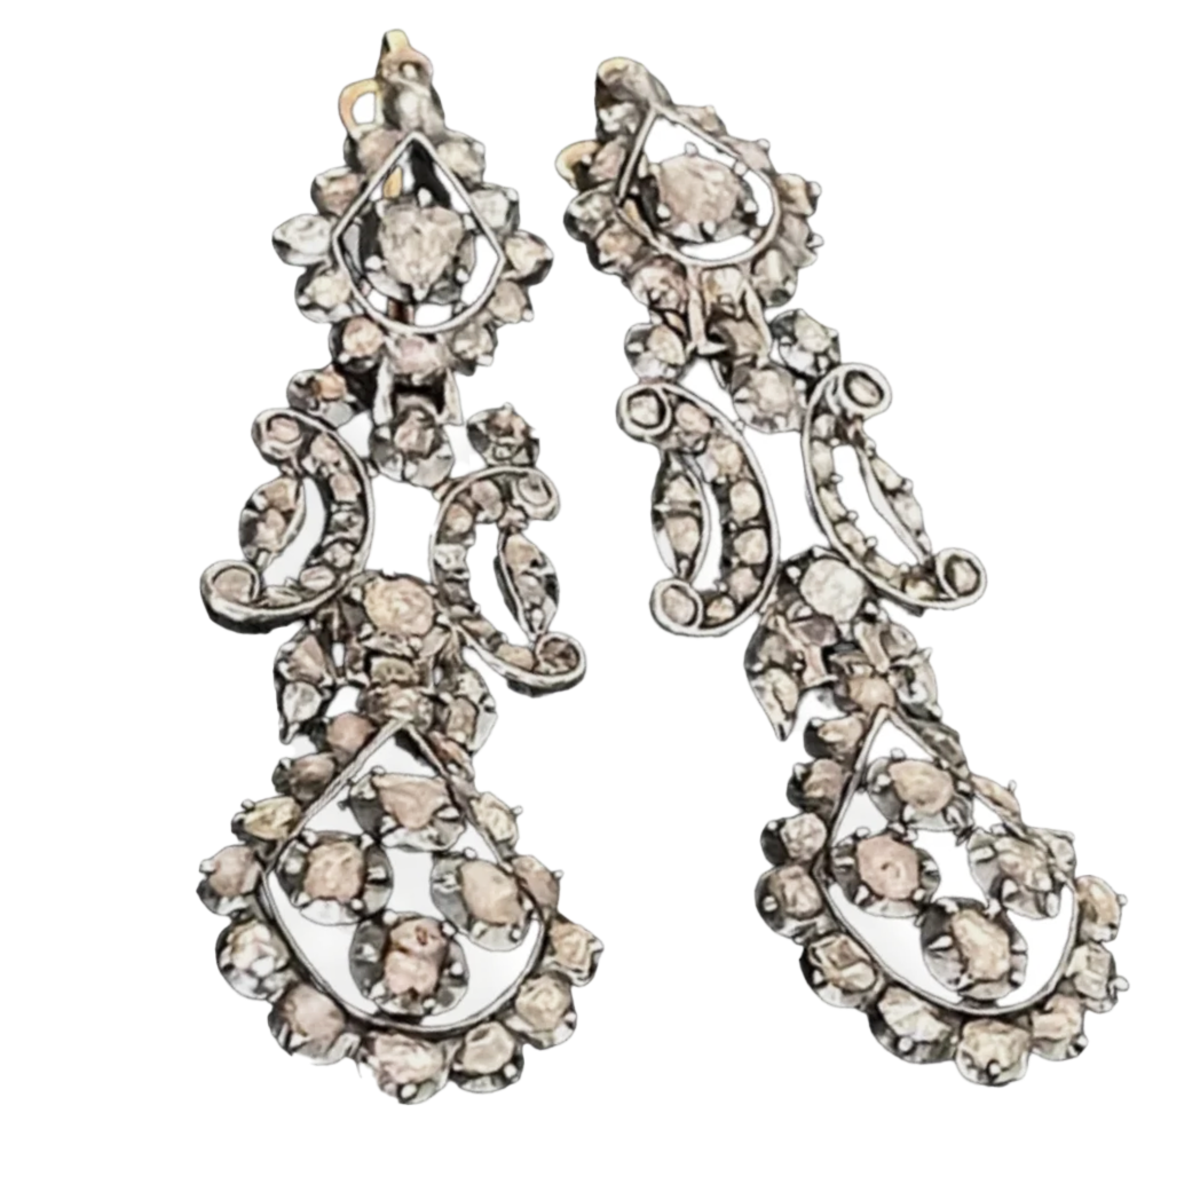 Antique Silver Diamond Iberian Earrings front view